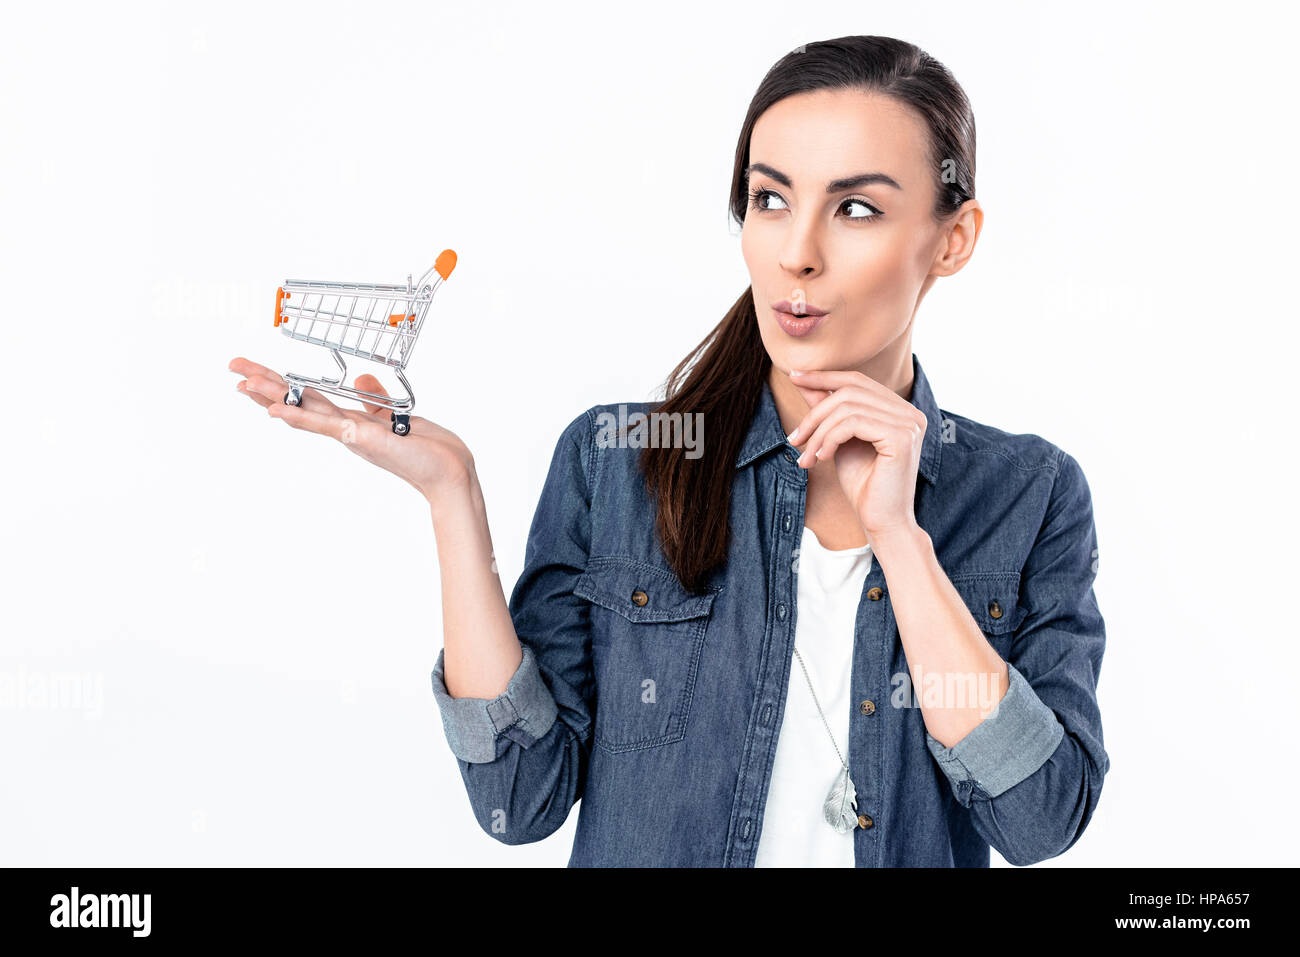 cunning woman holding shopping cart model on palm Stock Photo